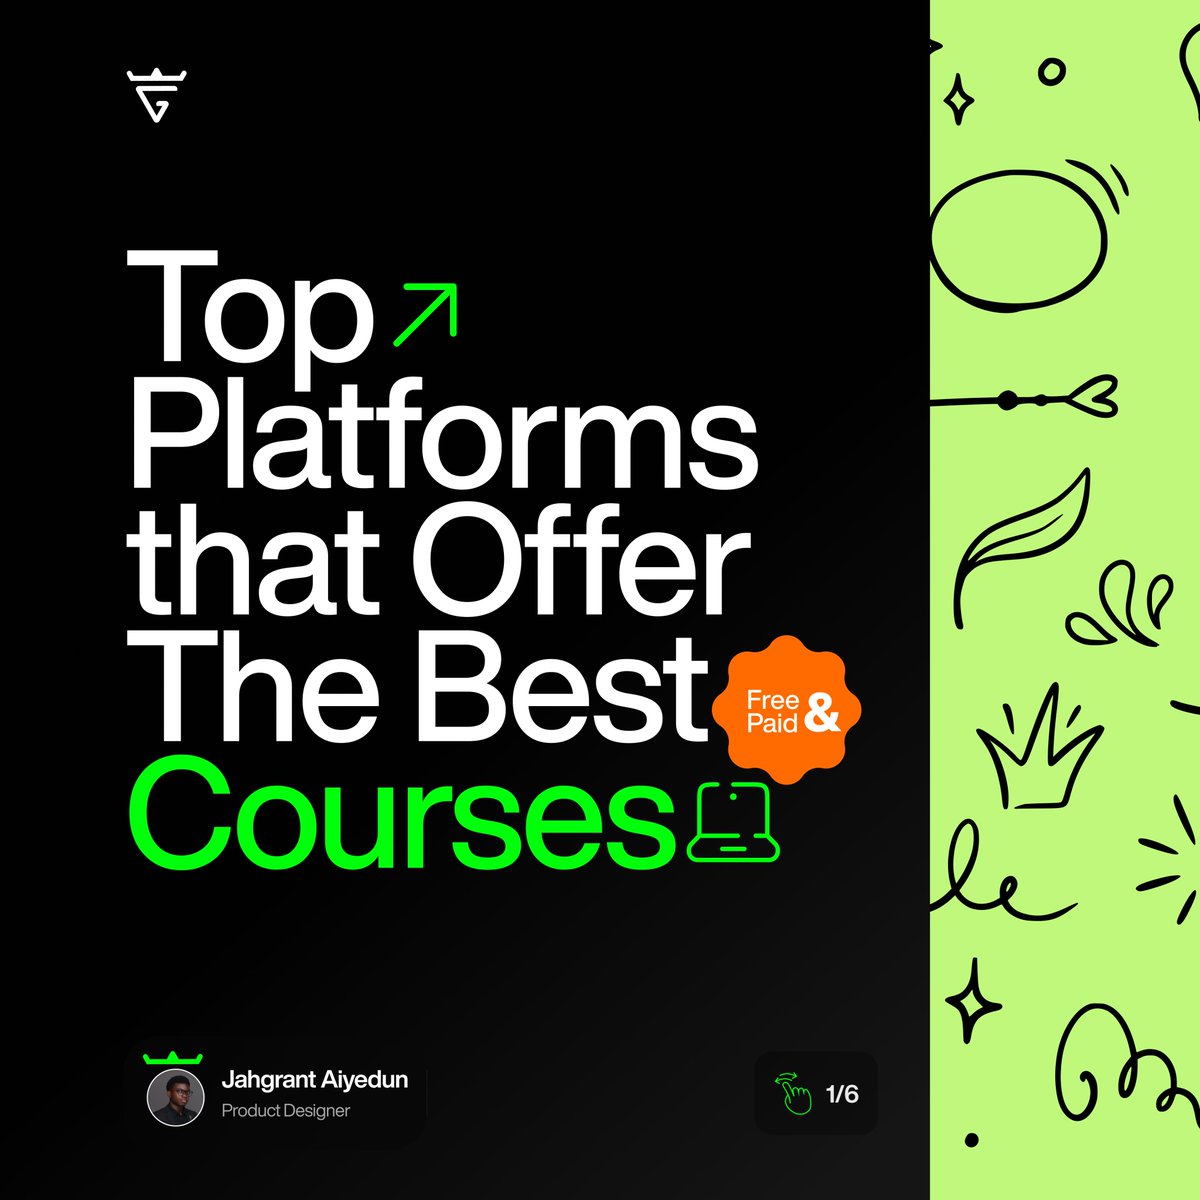 5 of some of the top platforms you can get top quality online courses.

#onlinecourse #linkedinlearning #udemy #paidcourse #edx #domestika #coursera